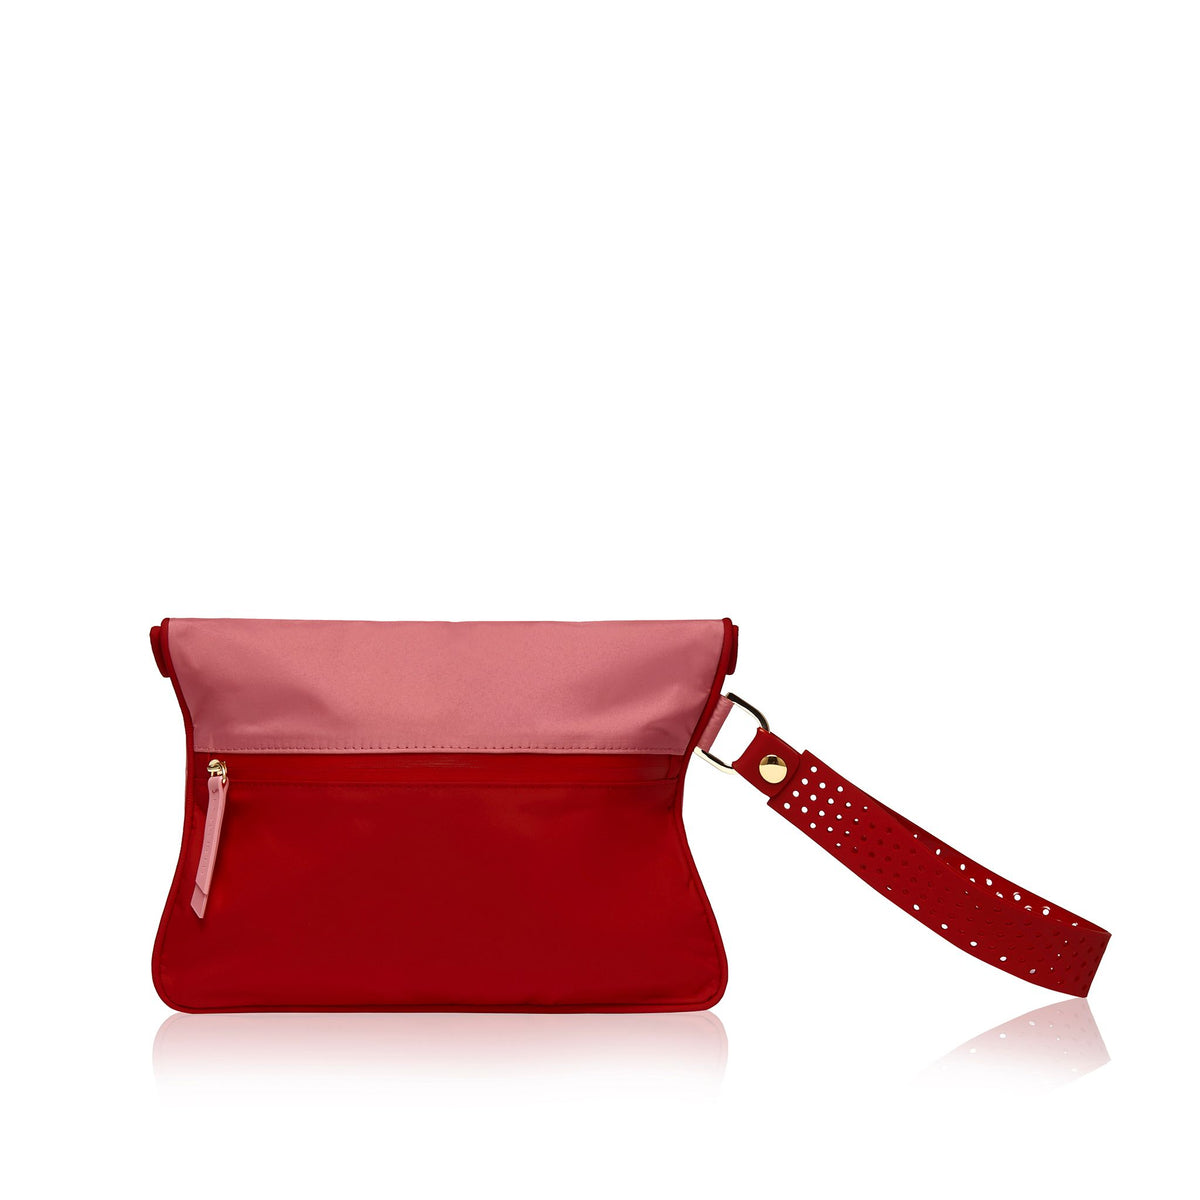 Rear view of Small wet bag in Peony and Chilli colourway showing back zip